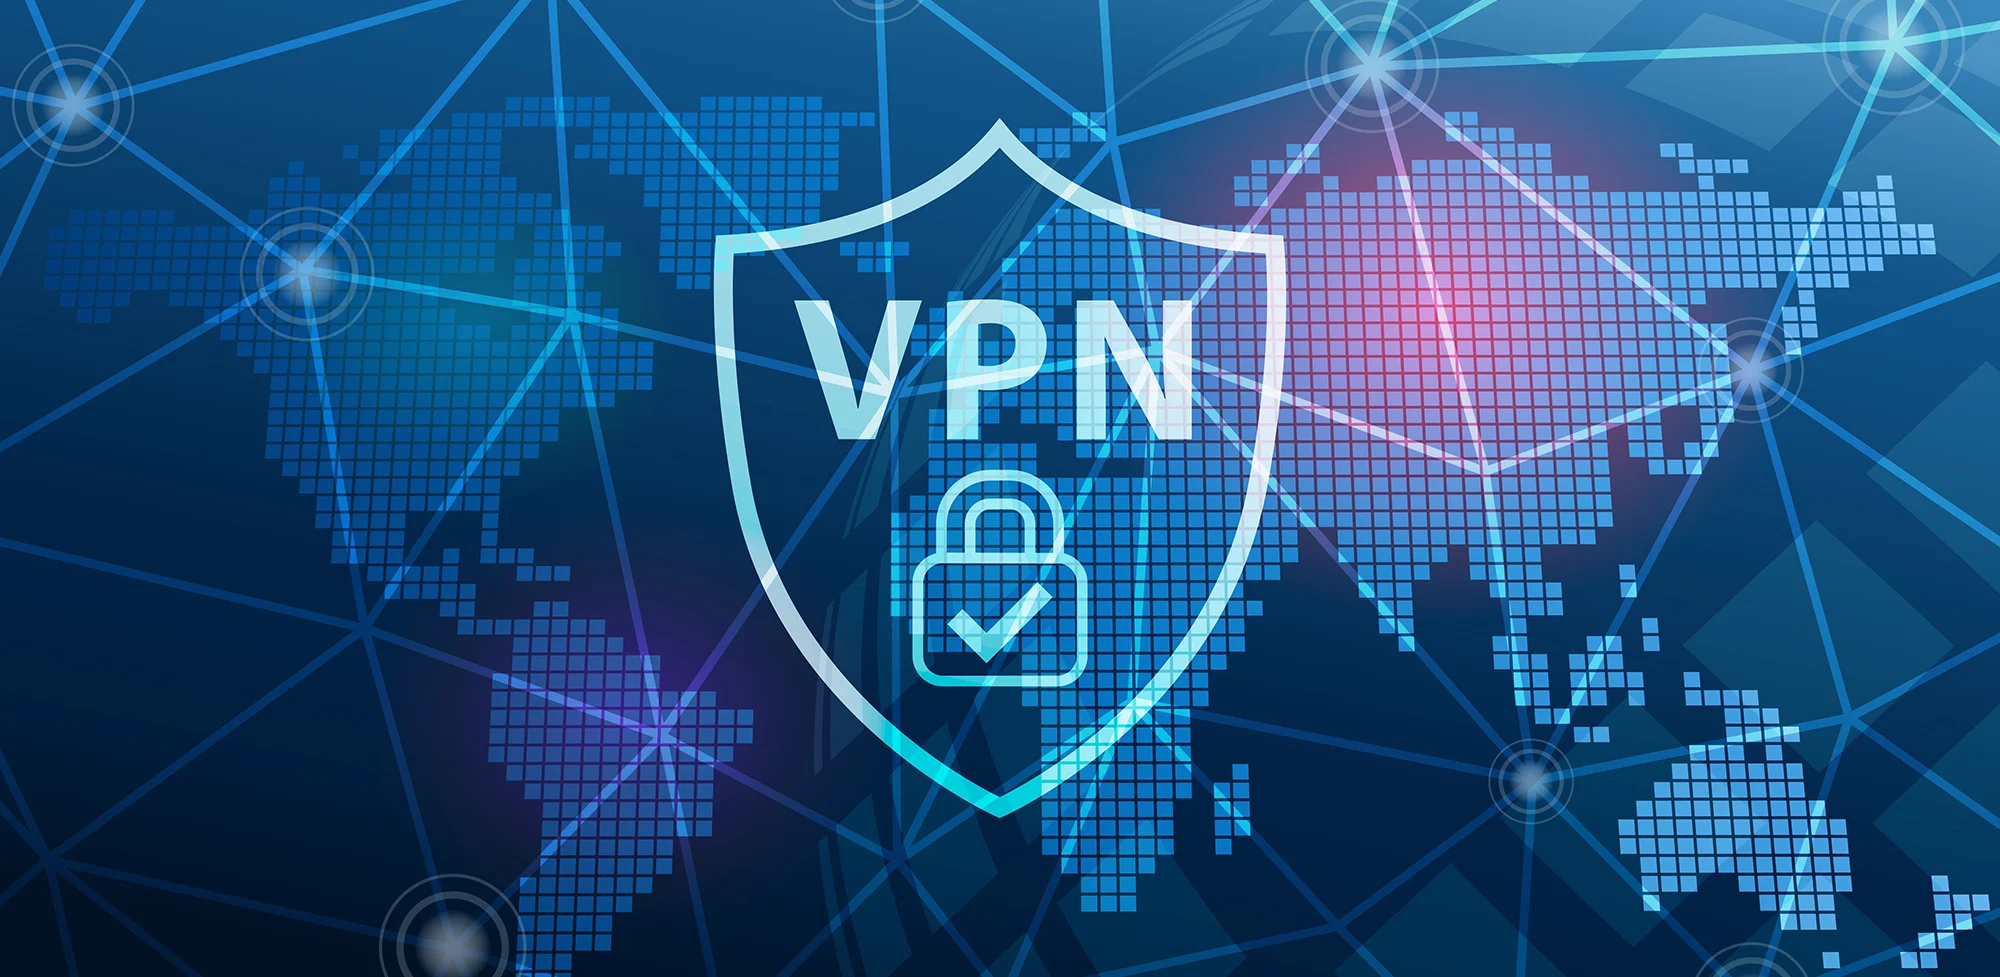 Why use a VPN? 5 reasons you should be using one